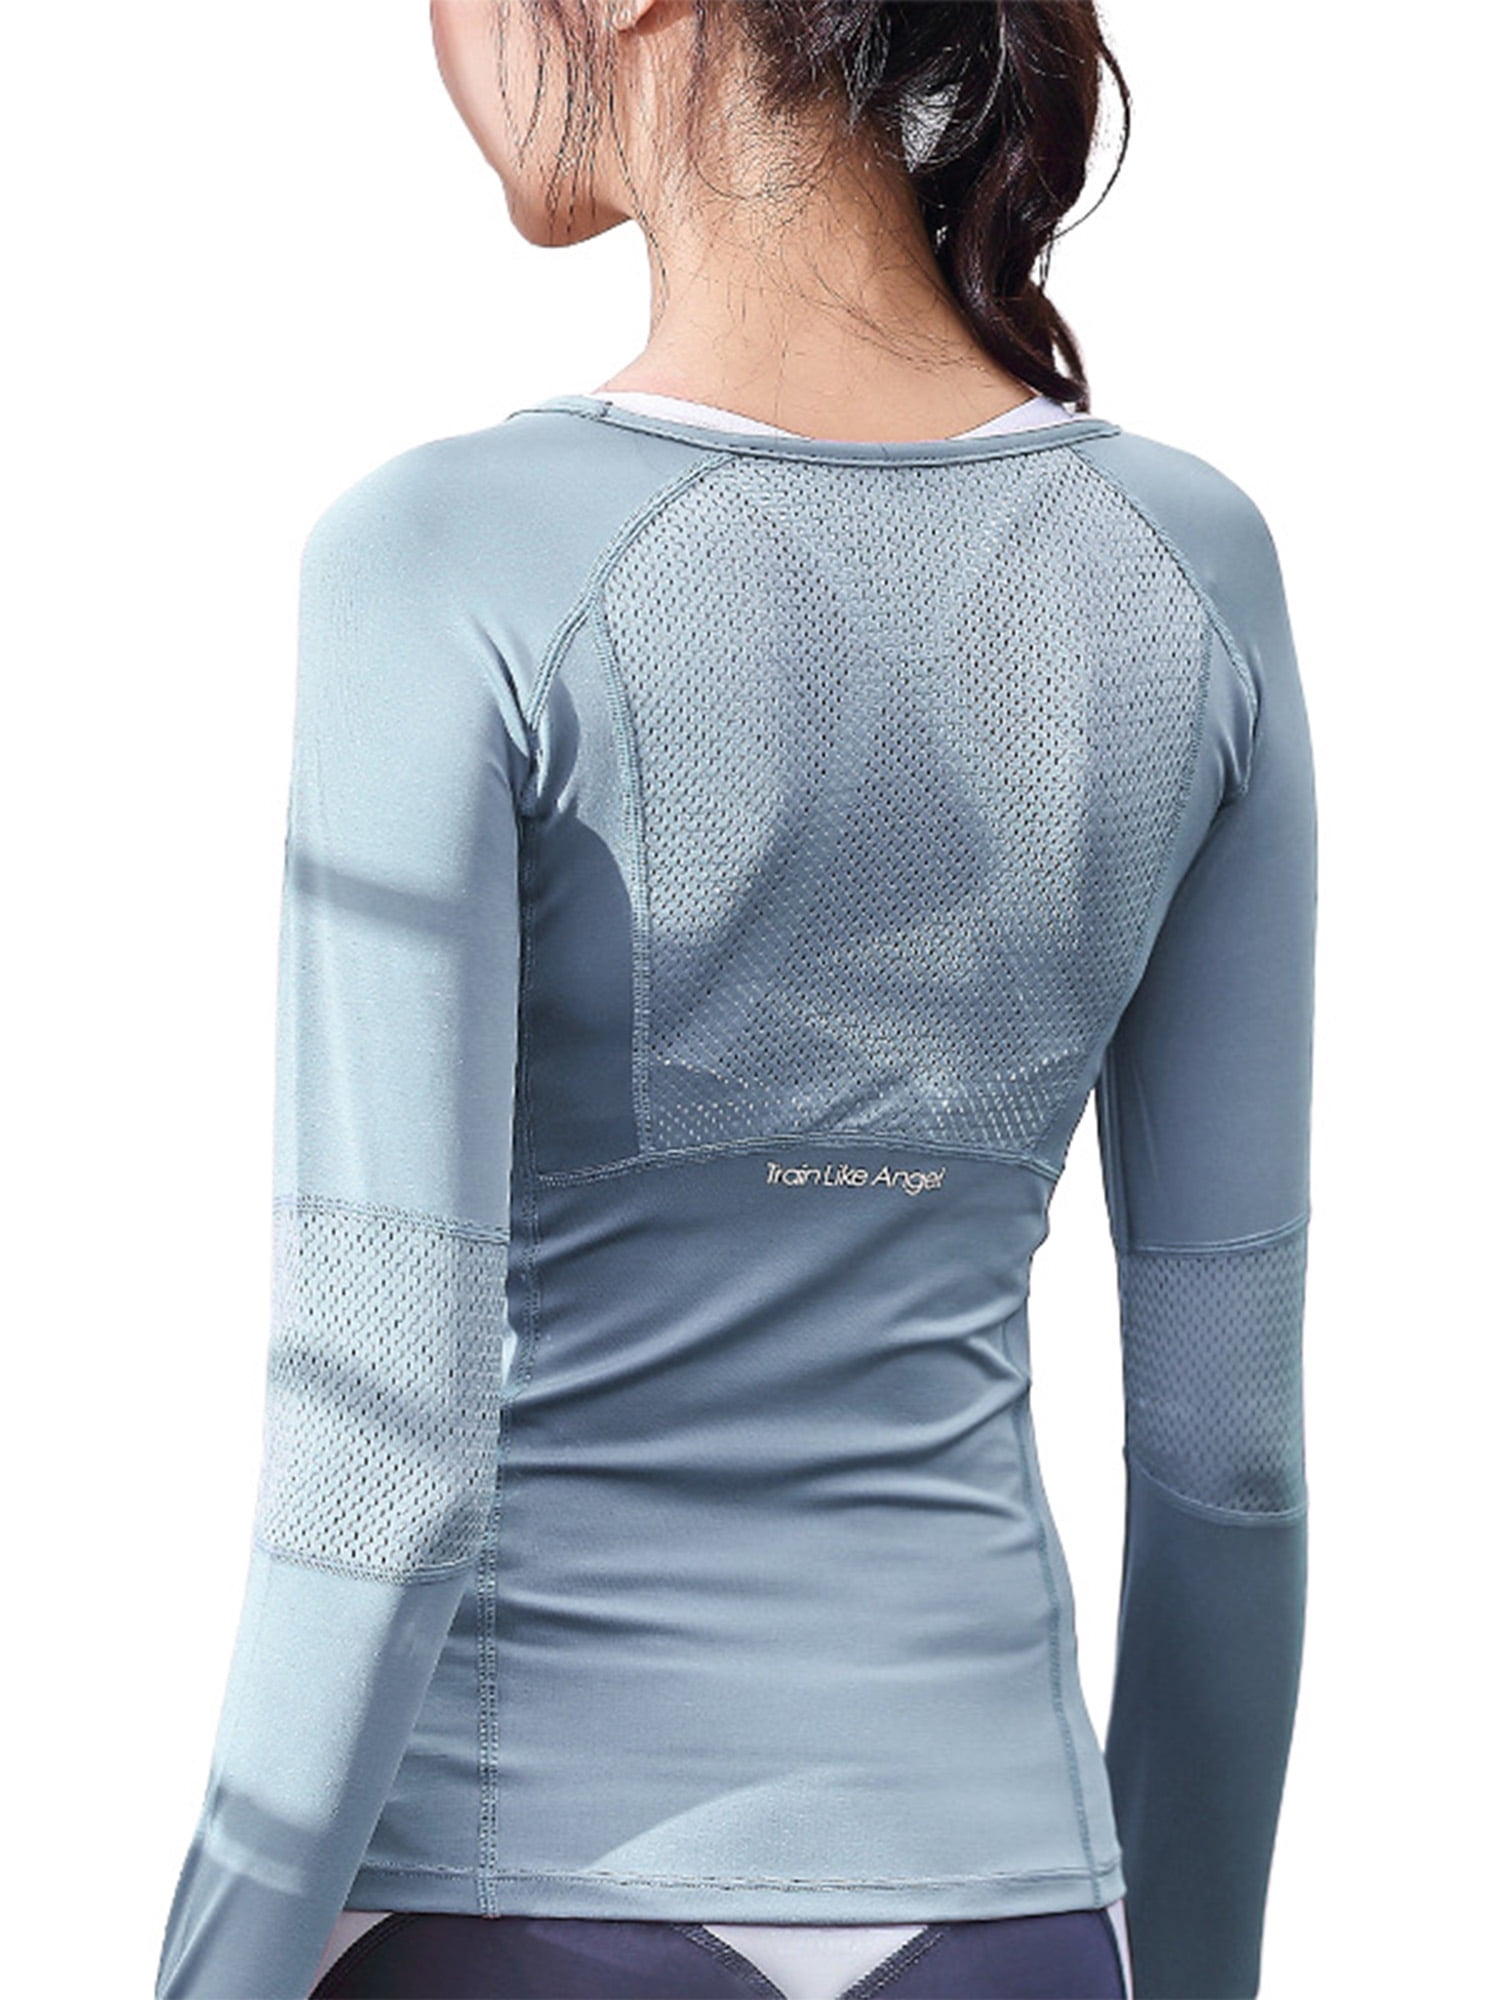 Mesh Gym Sport Shirts Quick Dry Running Fitness Workout Fitness Yoga Sportswear